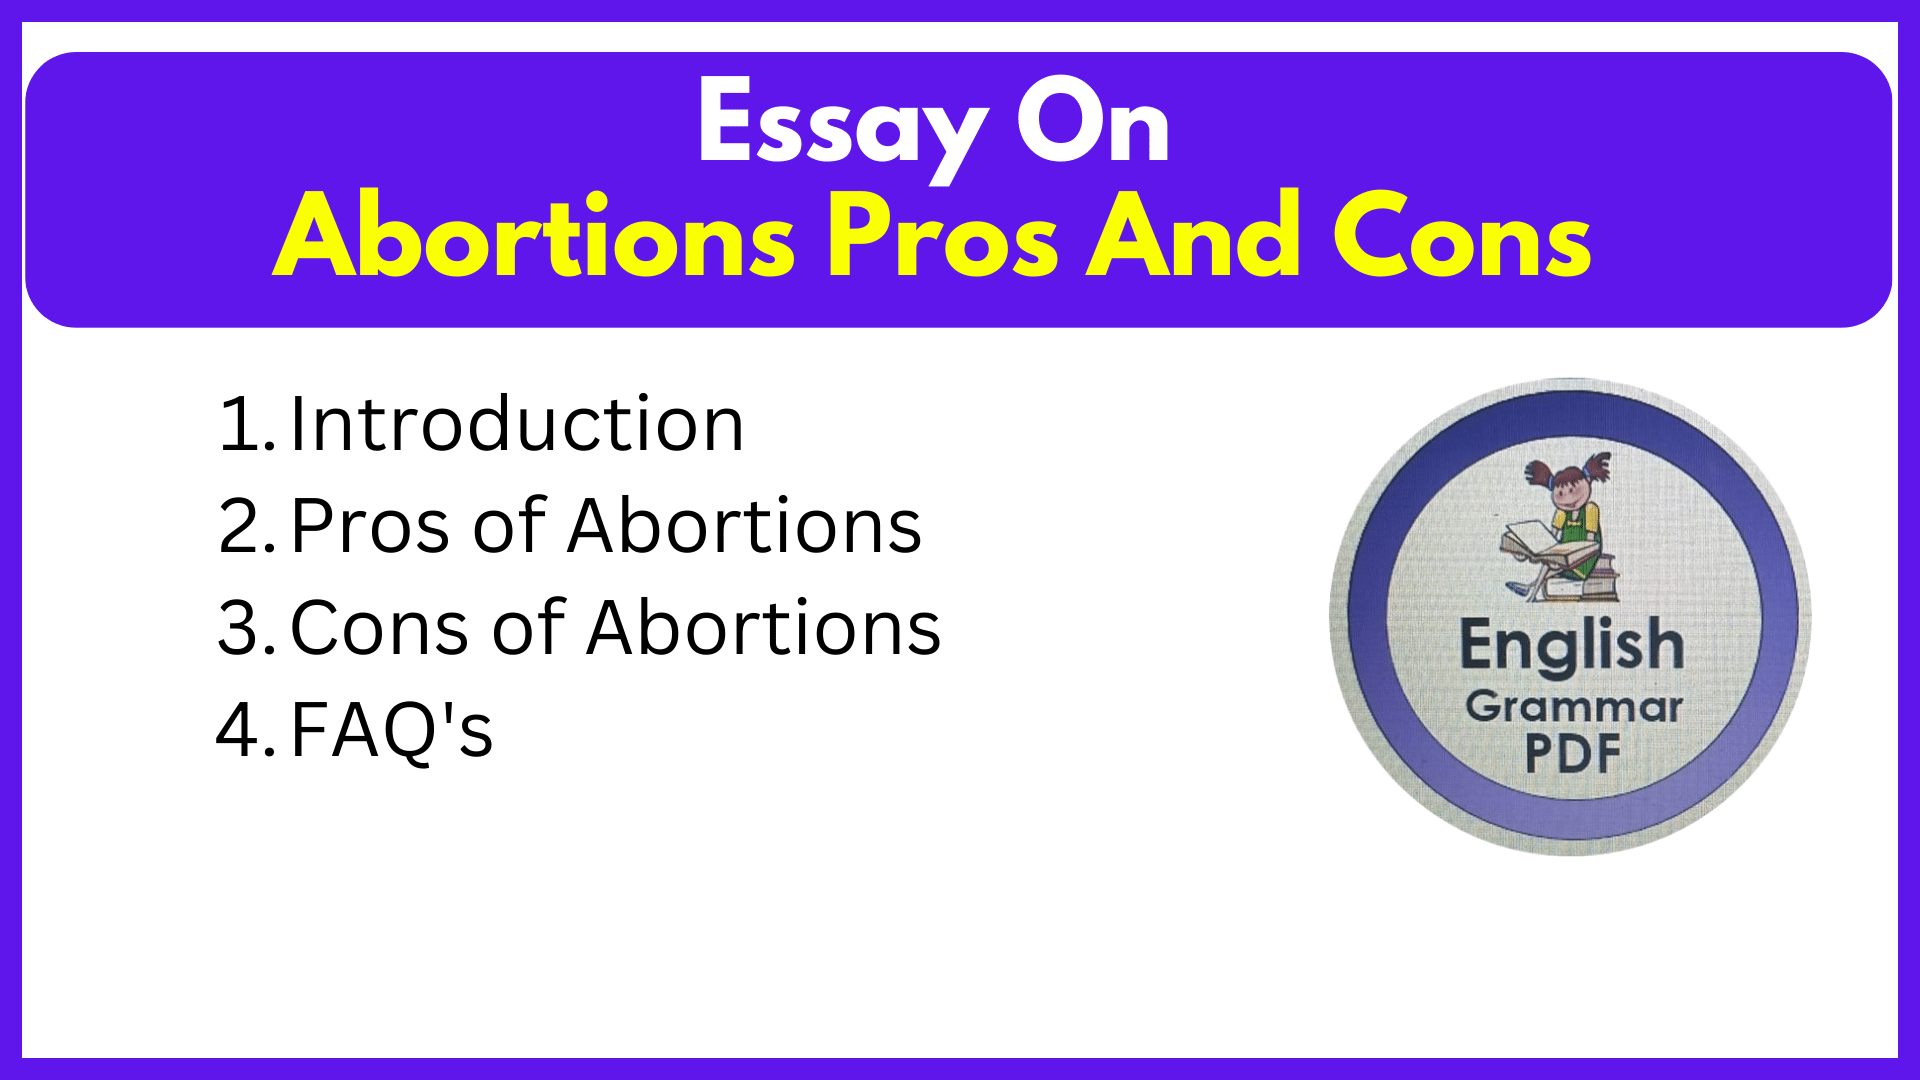 Essay On Abortions Pros And Cons